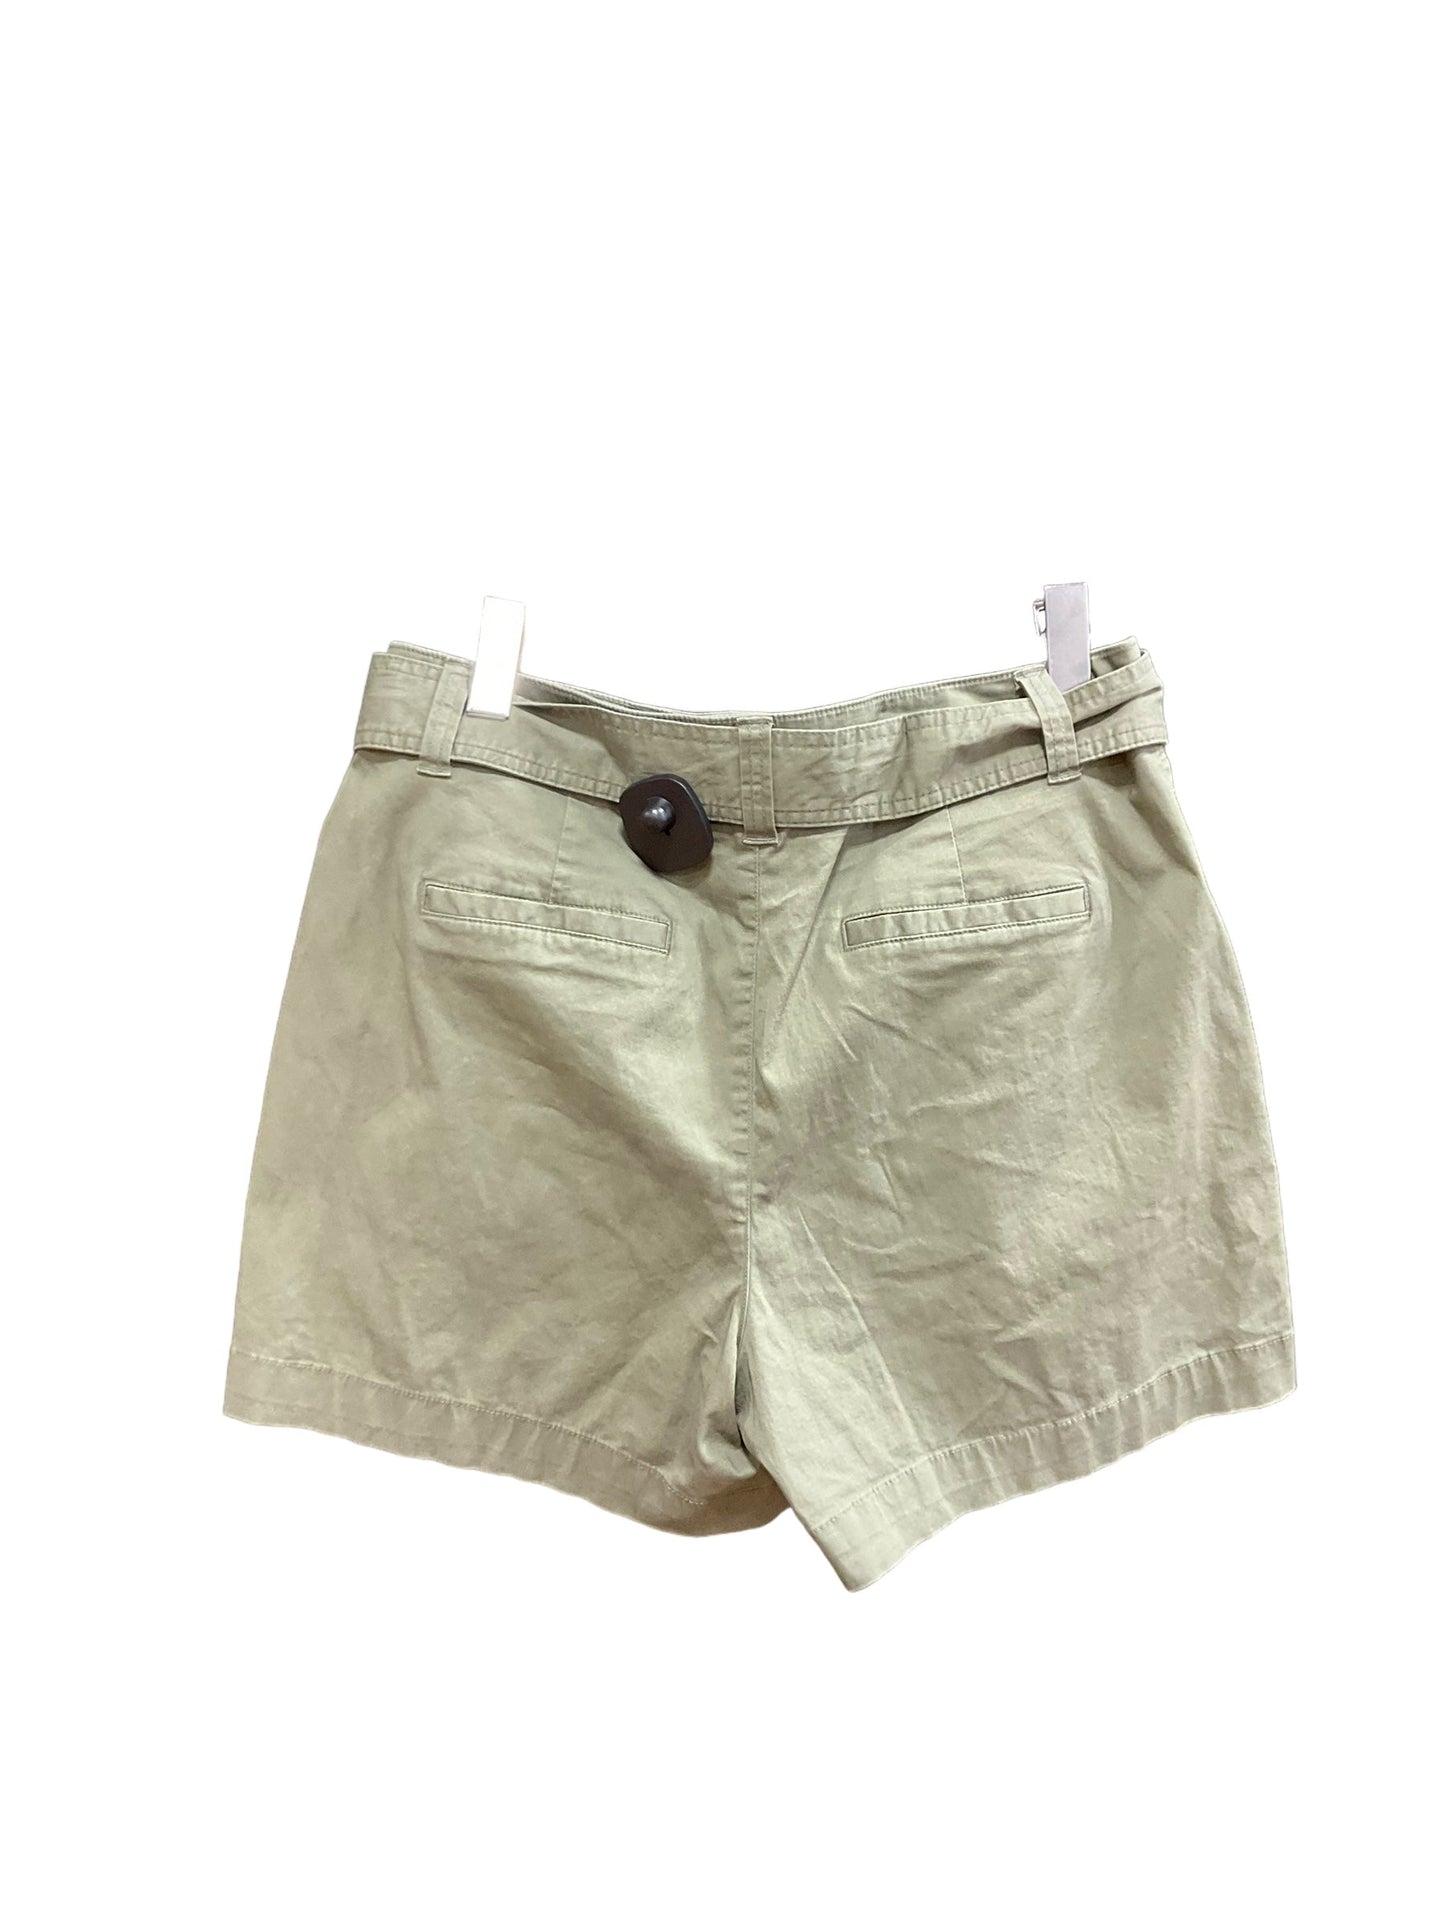 Olive Shorts A New Day, Size 10